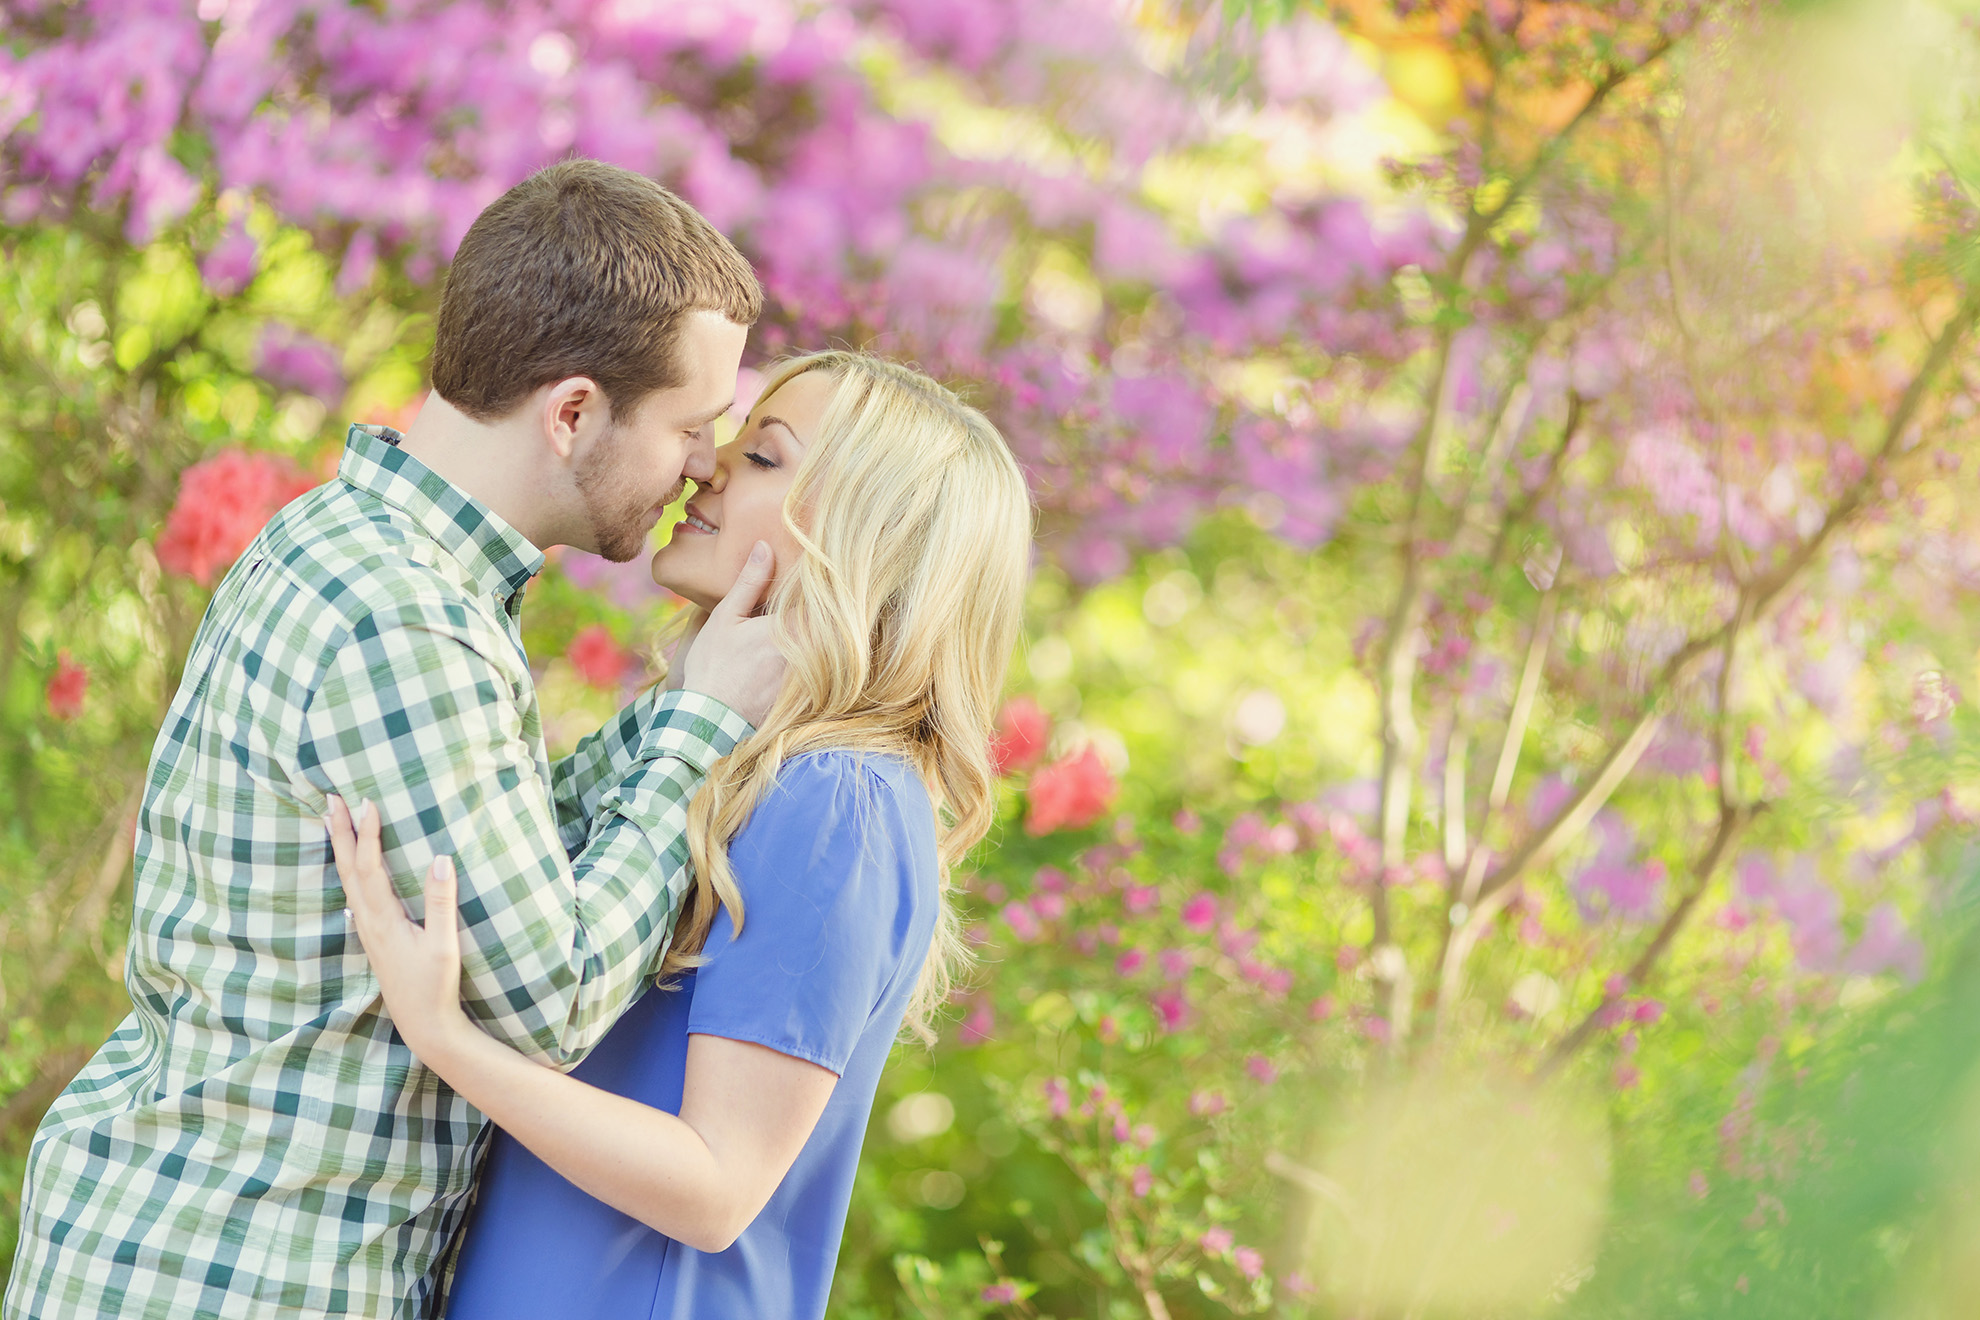 Image of an engaged couple embracing in front fo purple and pink flowered bushes